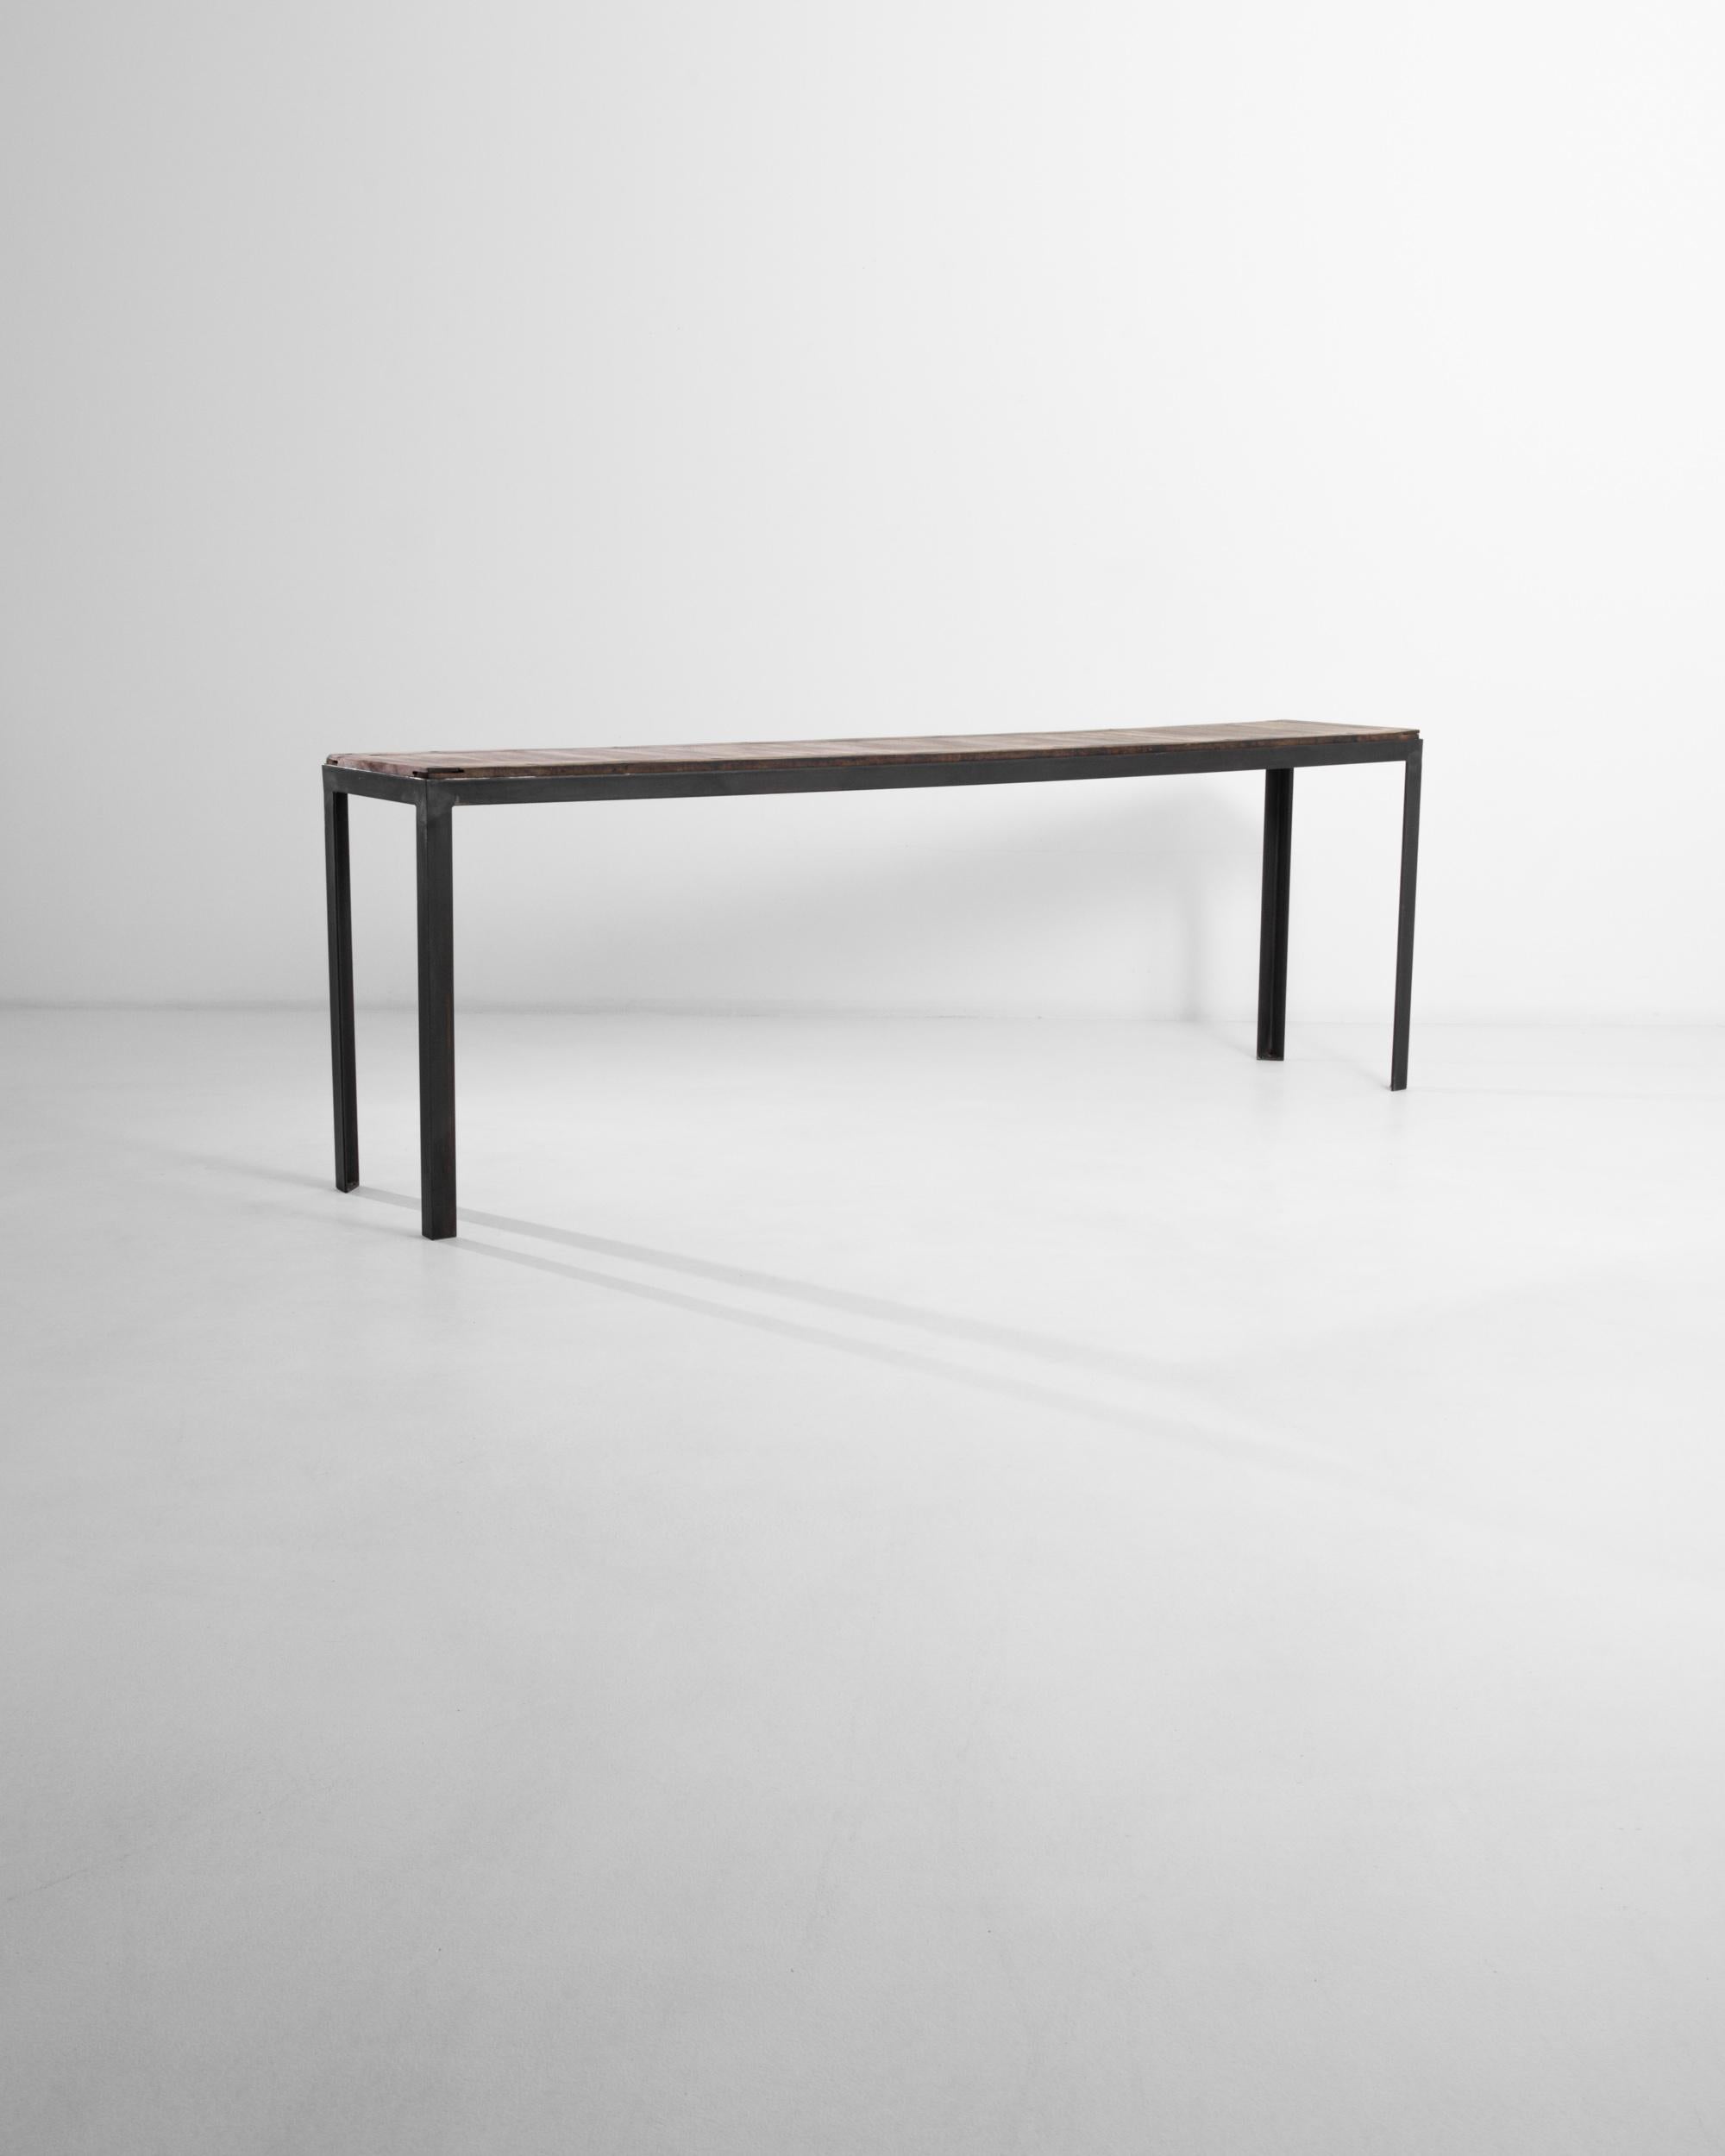 Industrial 20th Century European Minimalist Table with Wooden Table Top